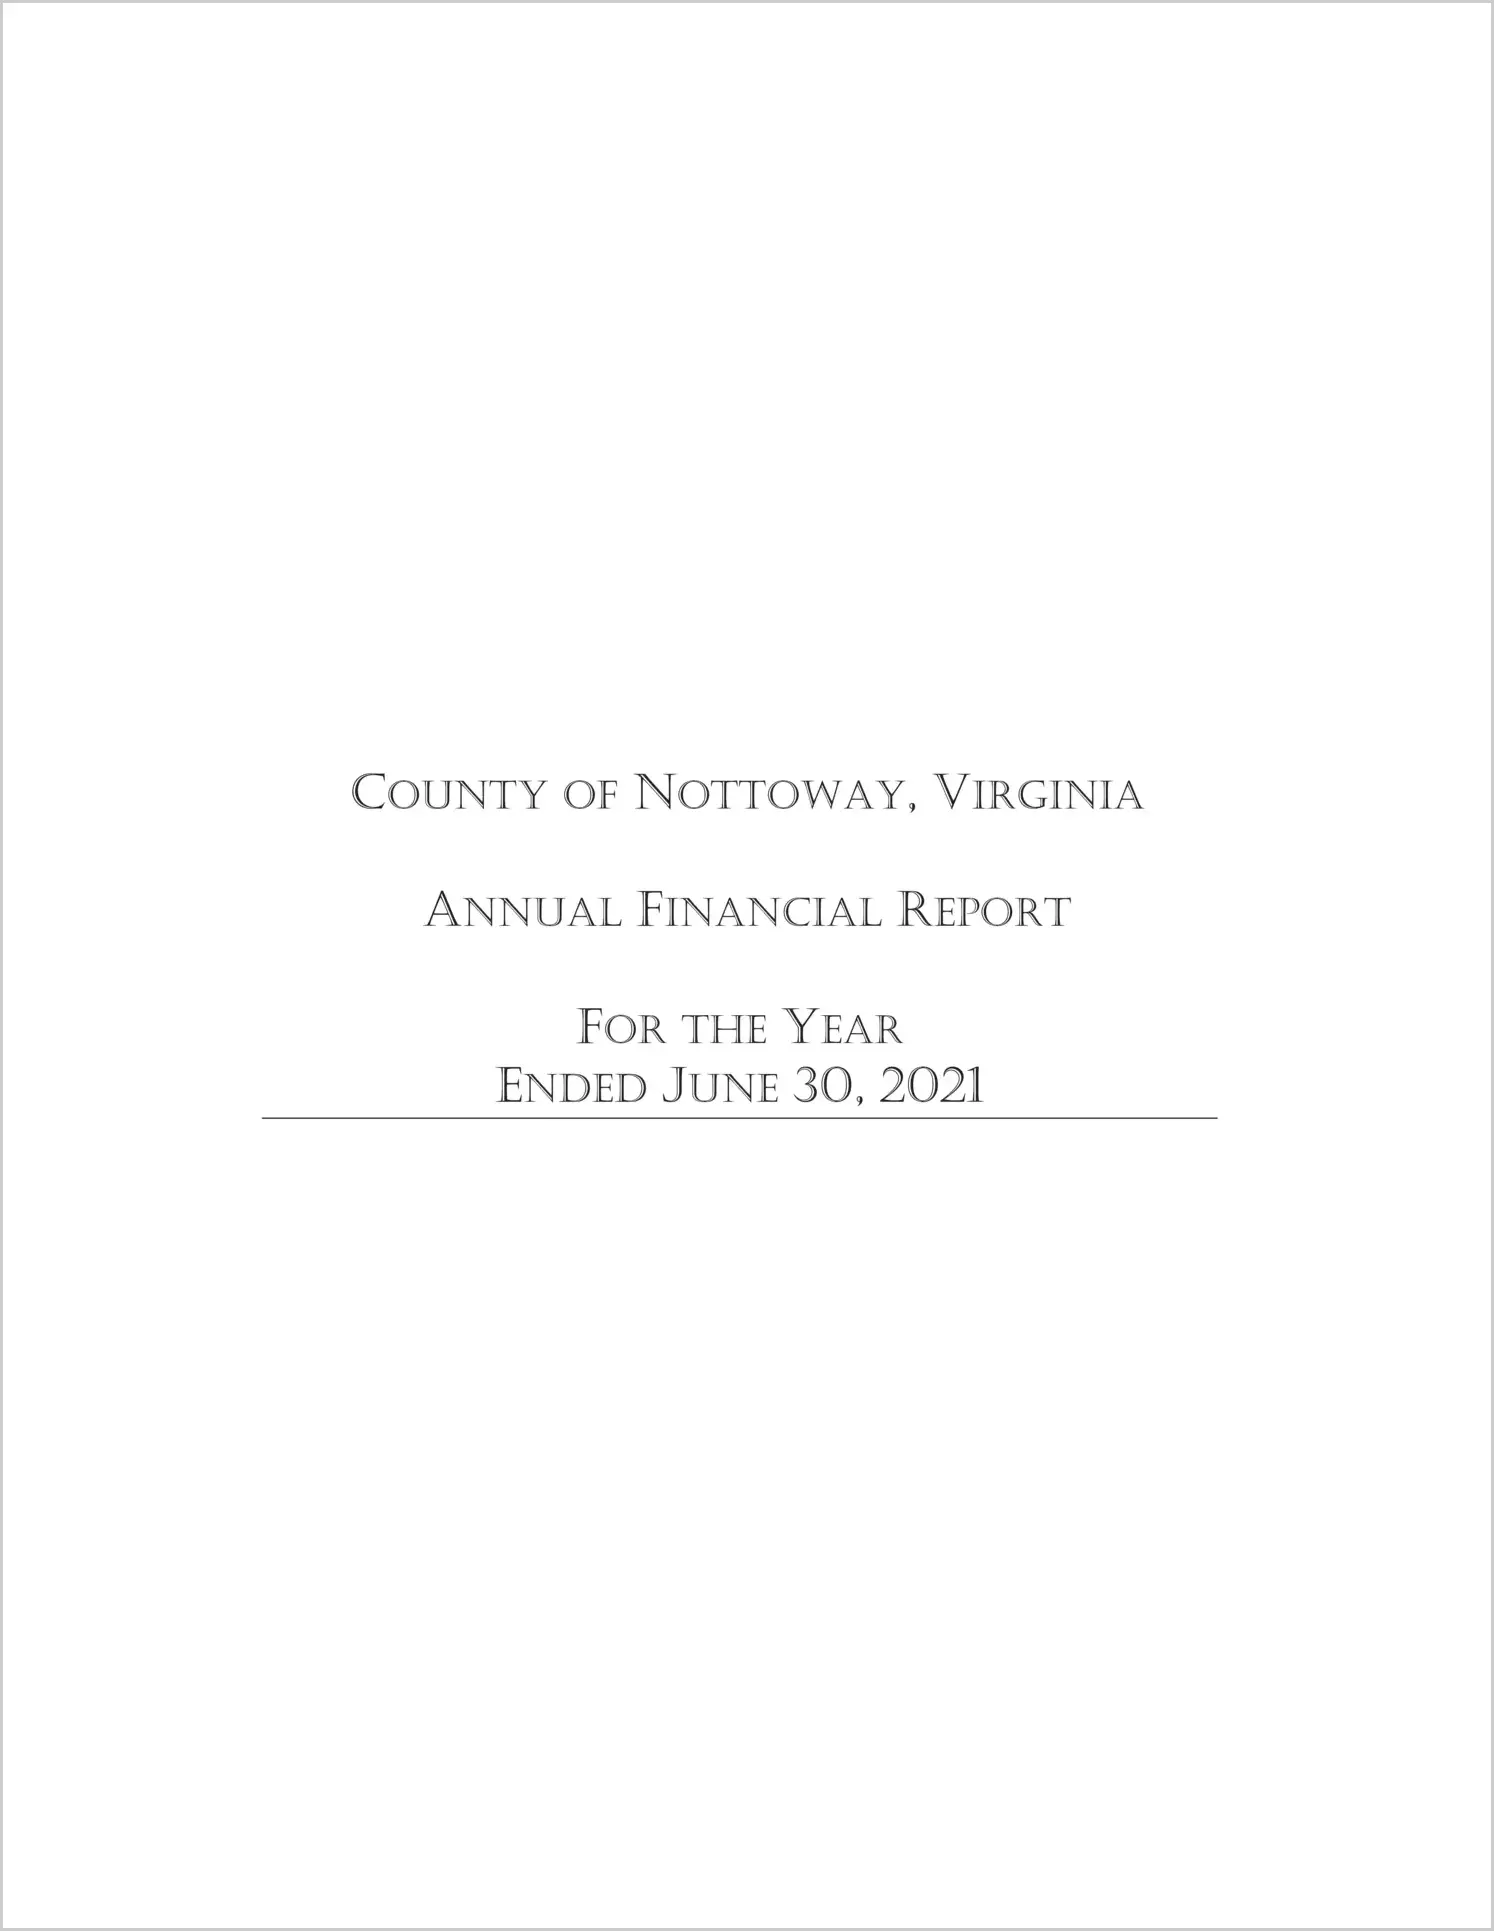 2021 Annual Financial Report for County of Nottoway